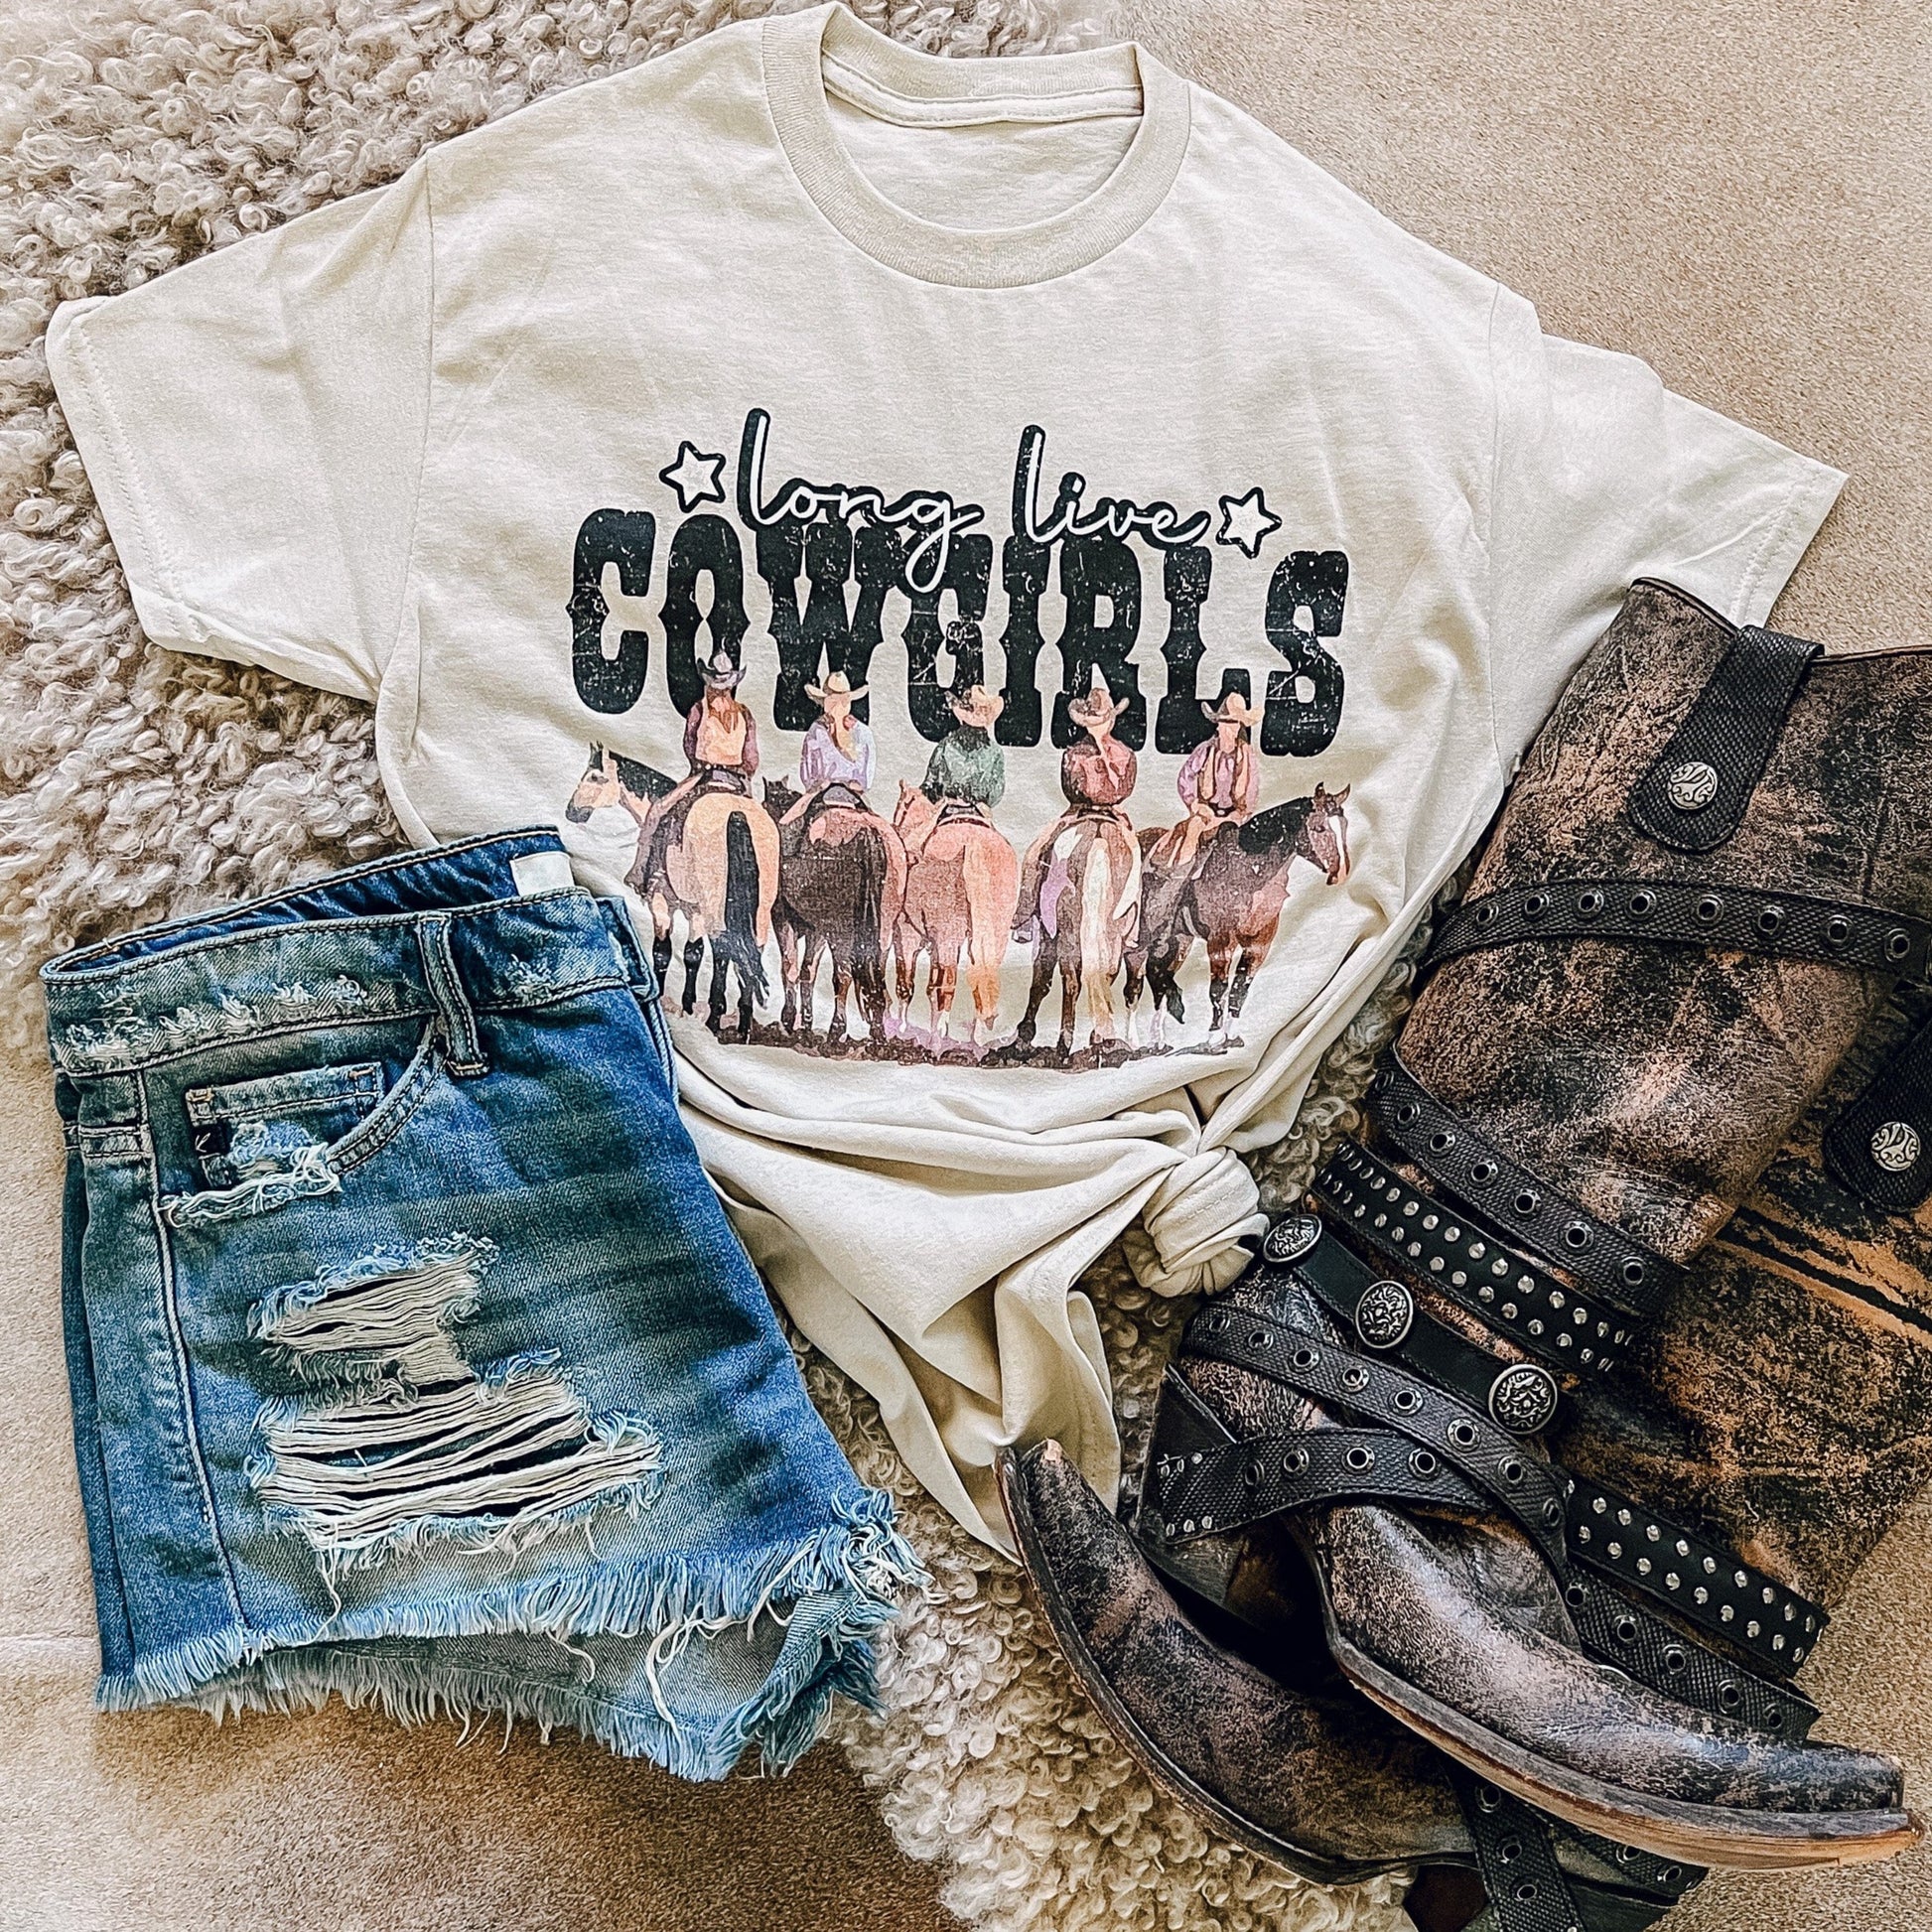 Envy Stylz Boutique Women - Apparel - Shirts - T-Shirts Long Live Cowgirls Graphic Tee